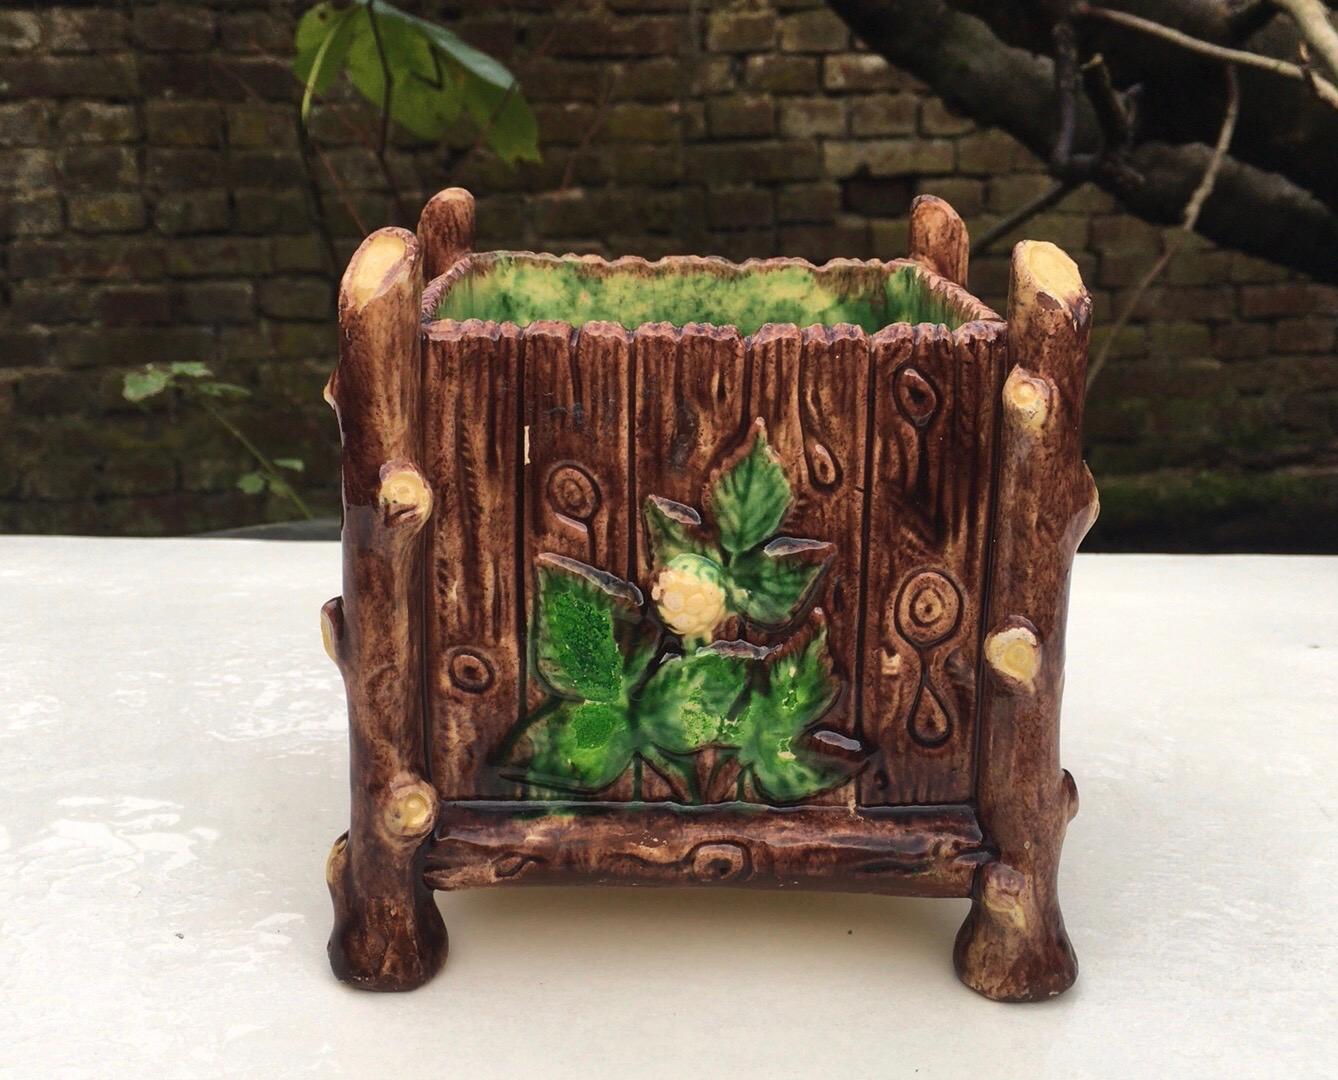 Large Majolica Palissy jardinière signed Saint Honore Les Bains circa 1880.
Each side with differents plants.
Measures: Height / 5.7 inches, length / 5.5 inches.